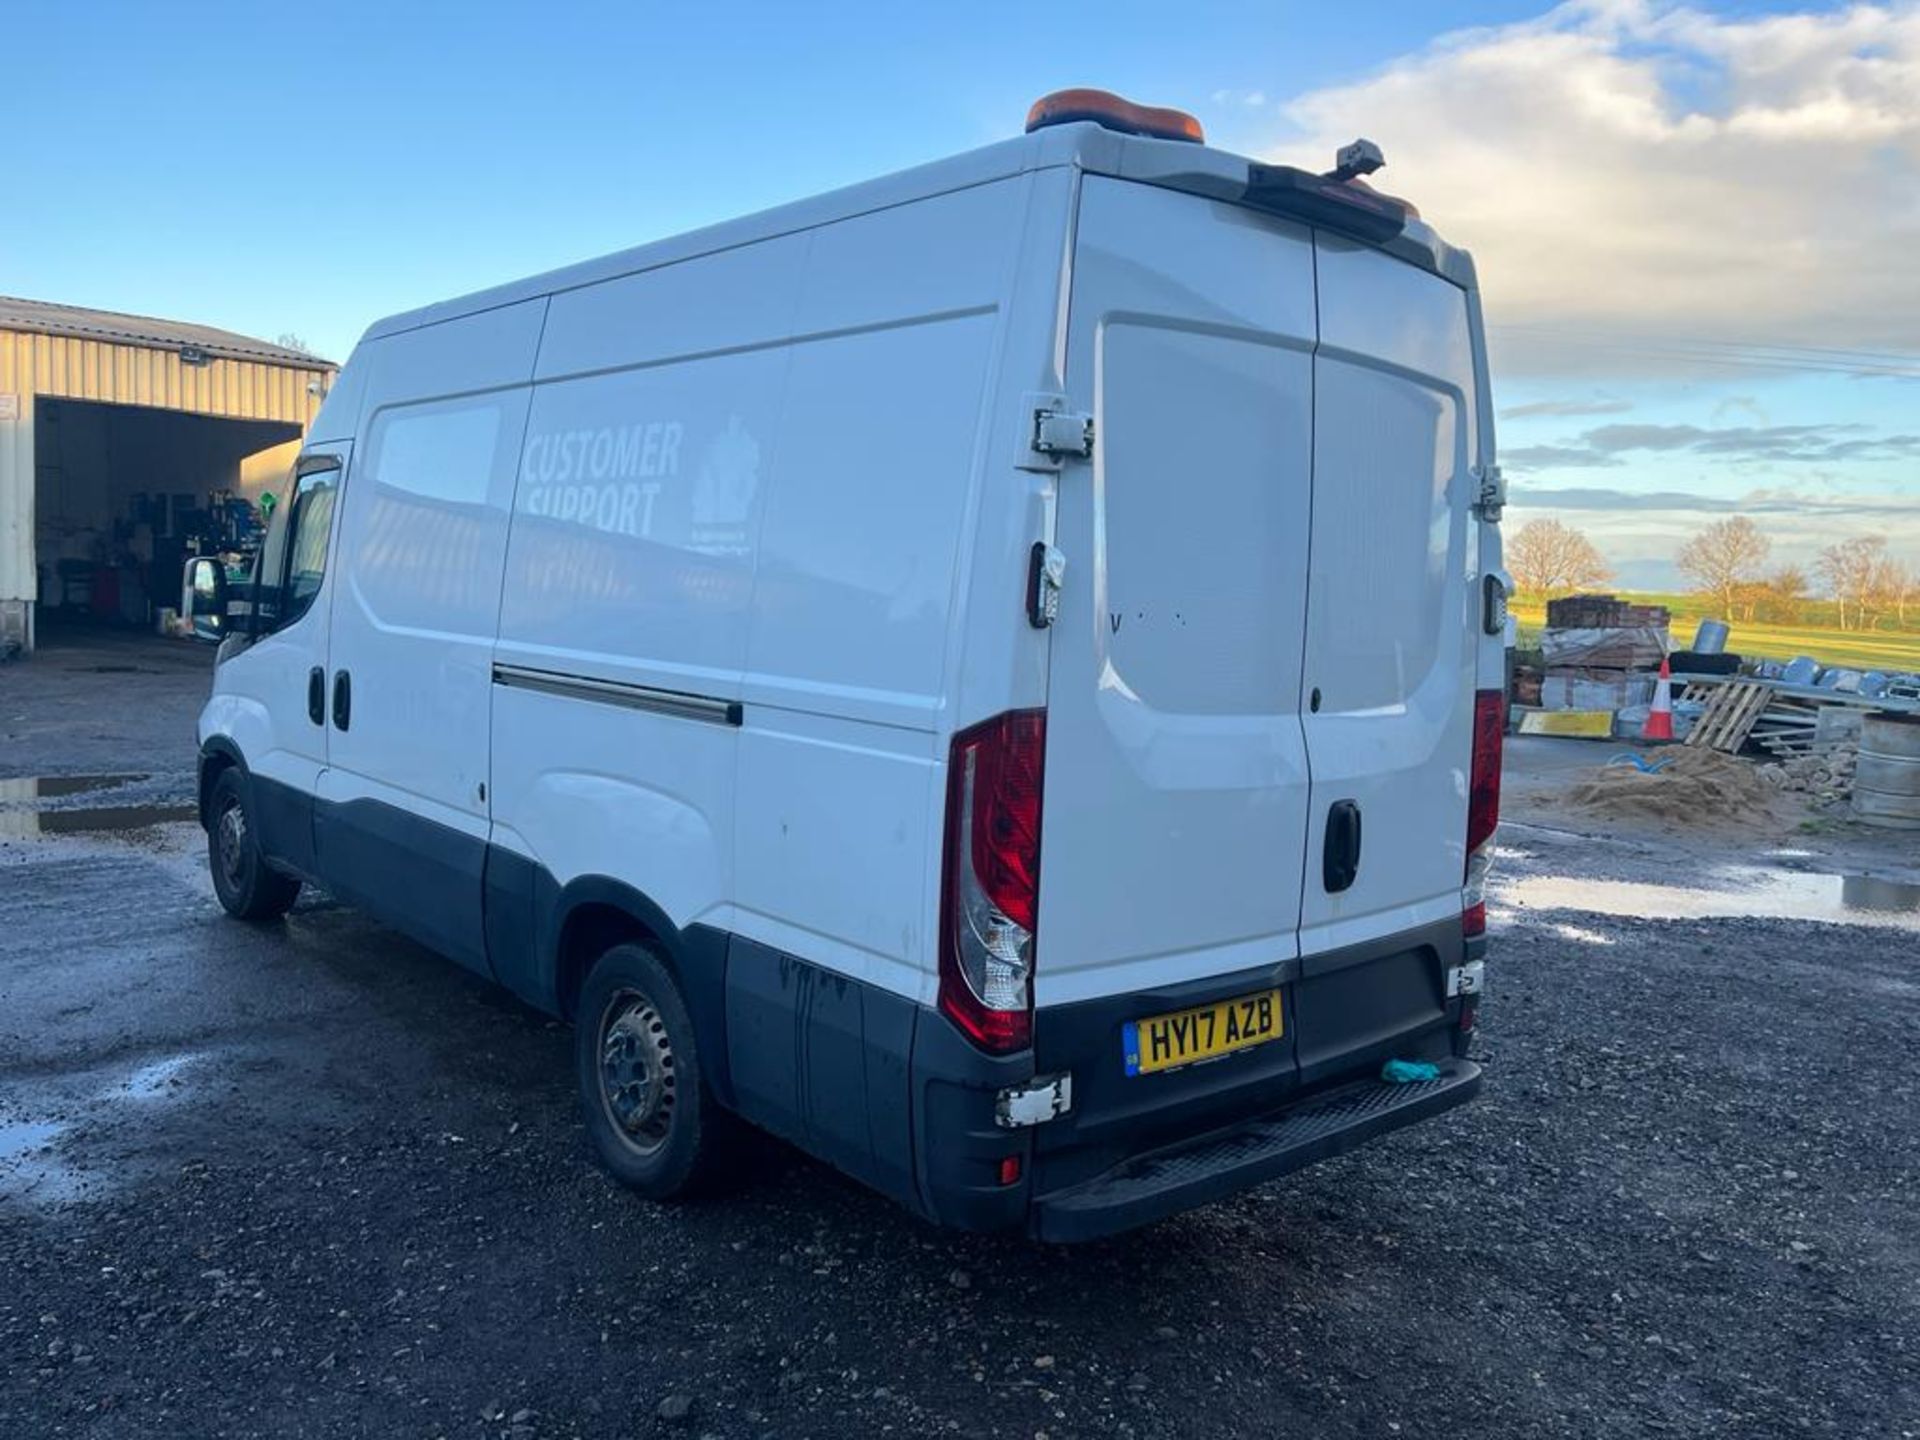 2017 Iveco daily mwb workshop van - Pto driven arc welder and 110v plug and 12v and 24v jump point - Image 5 of 11